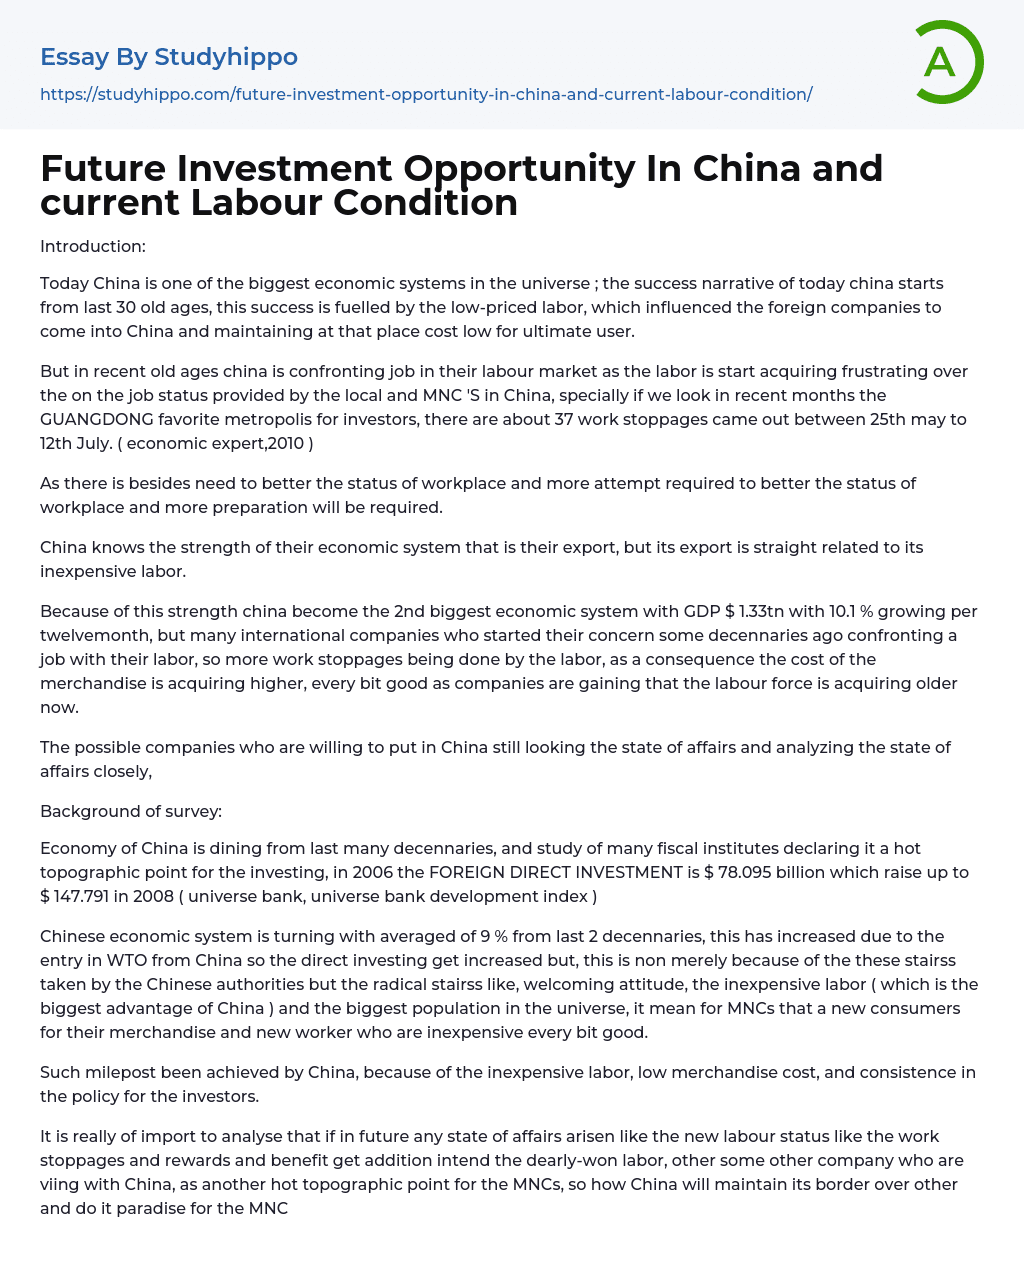 Future Investment Opportunity In China and current Labour Condition Essay Example